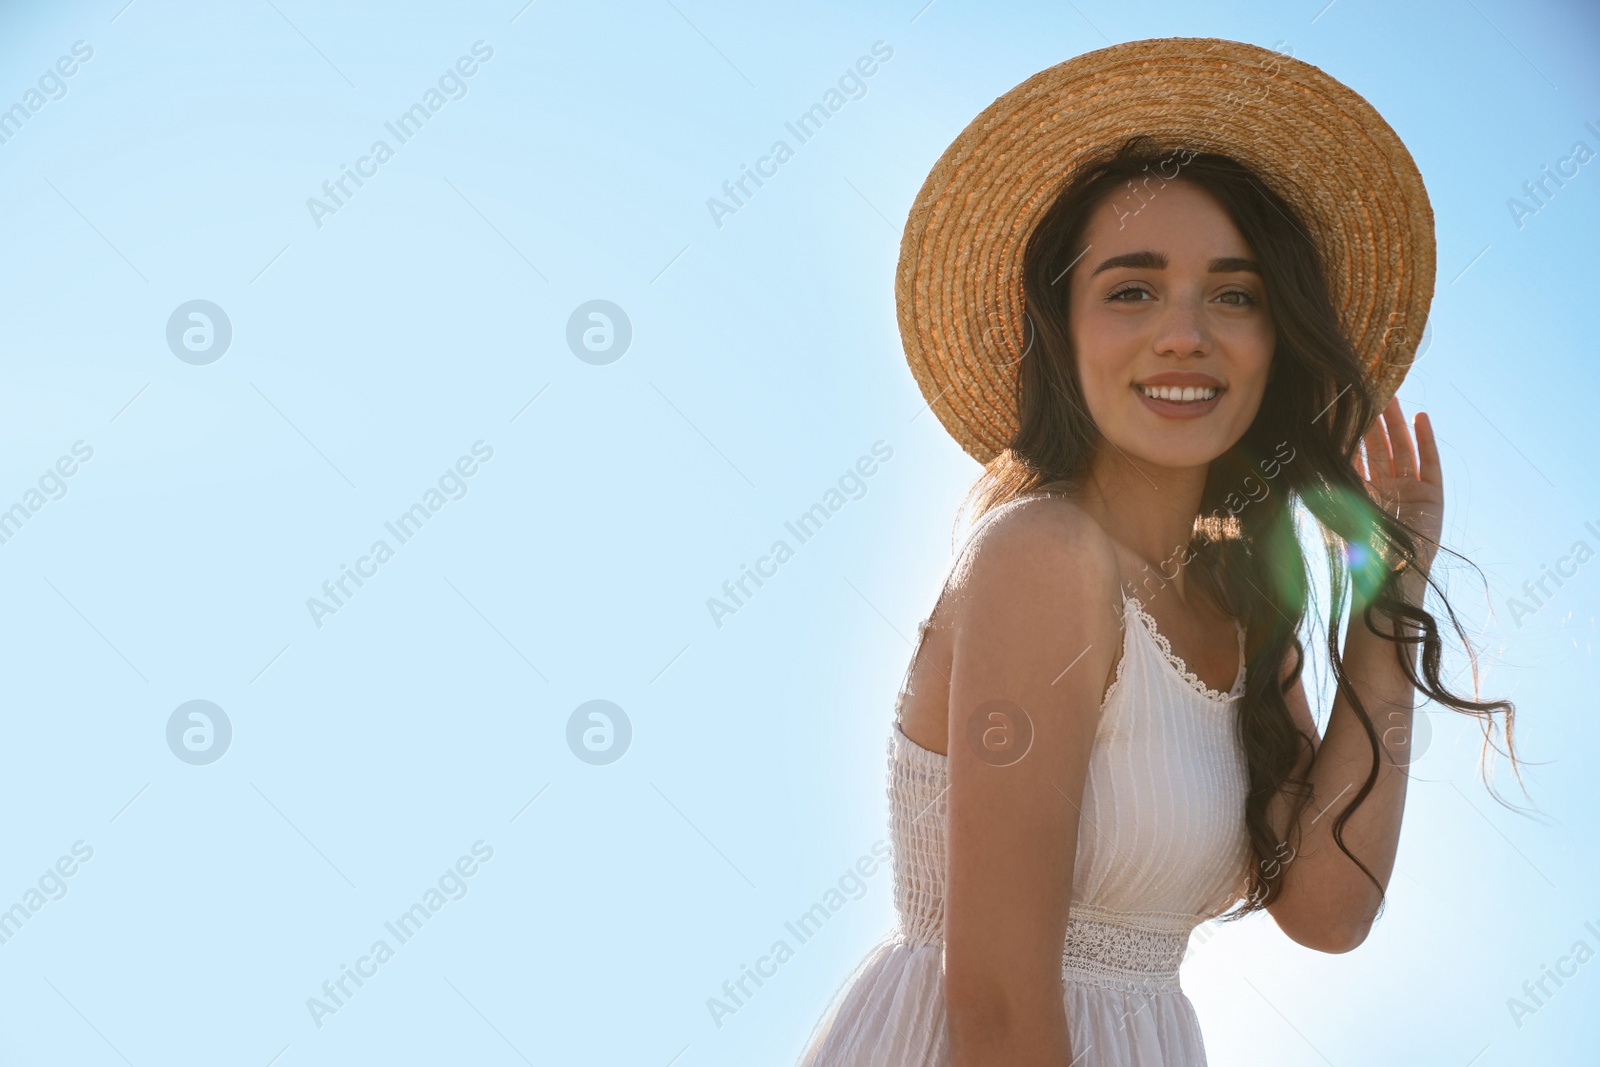 Photo of Happy young woman with beach hat against blue sky on sunny day